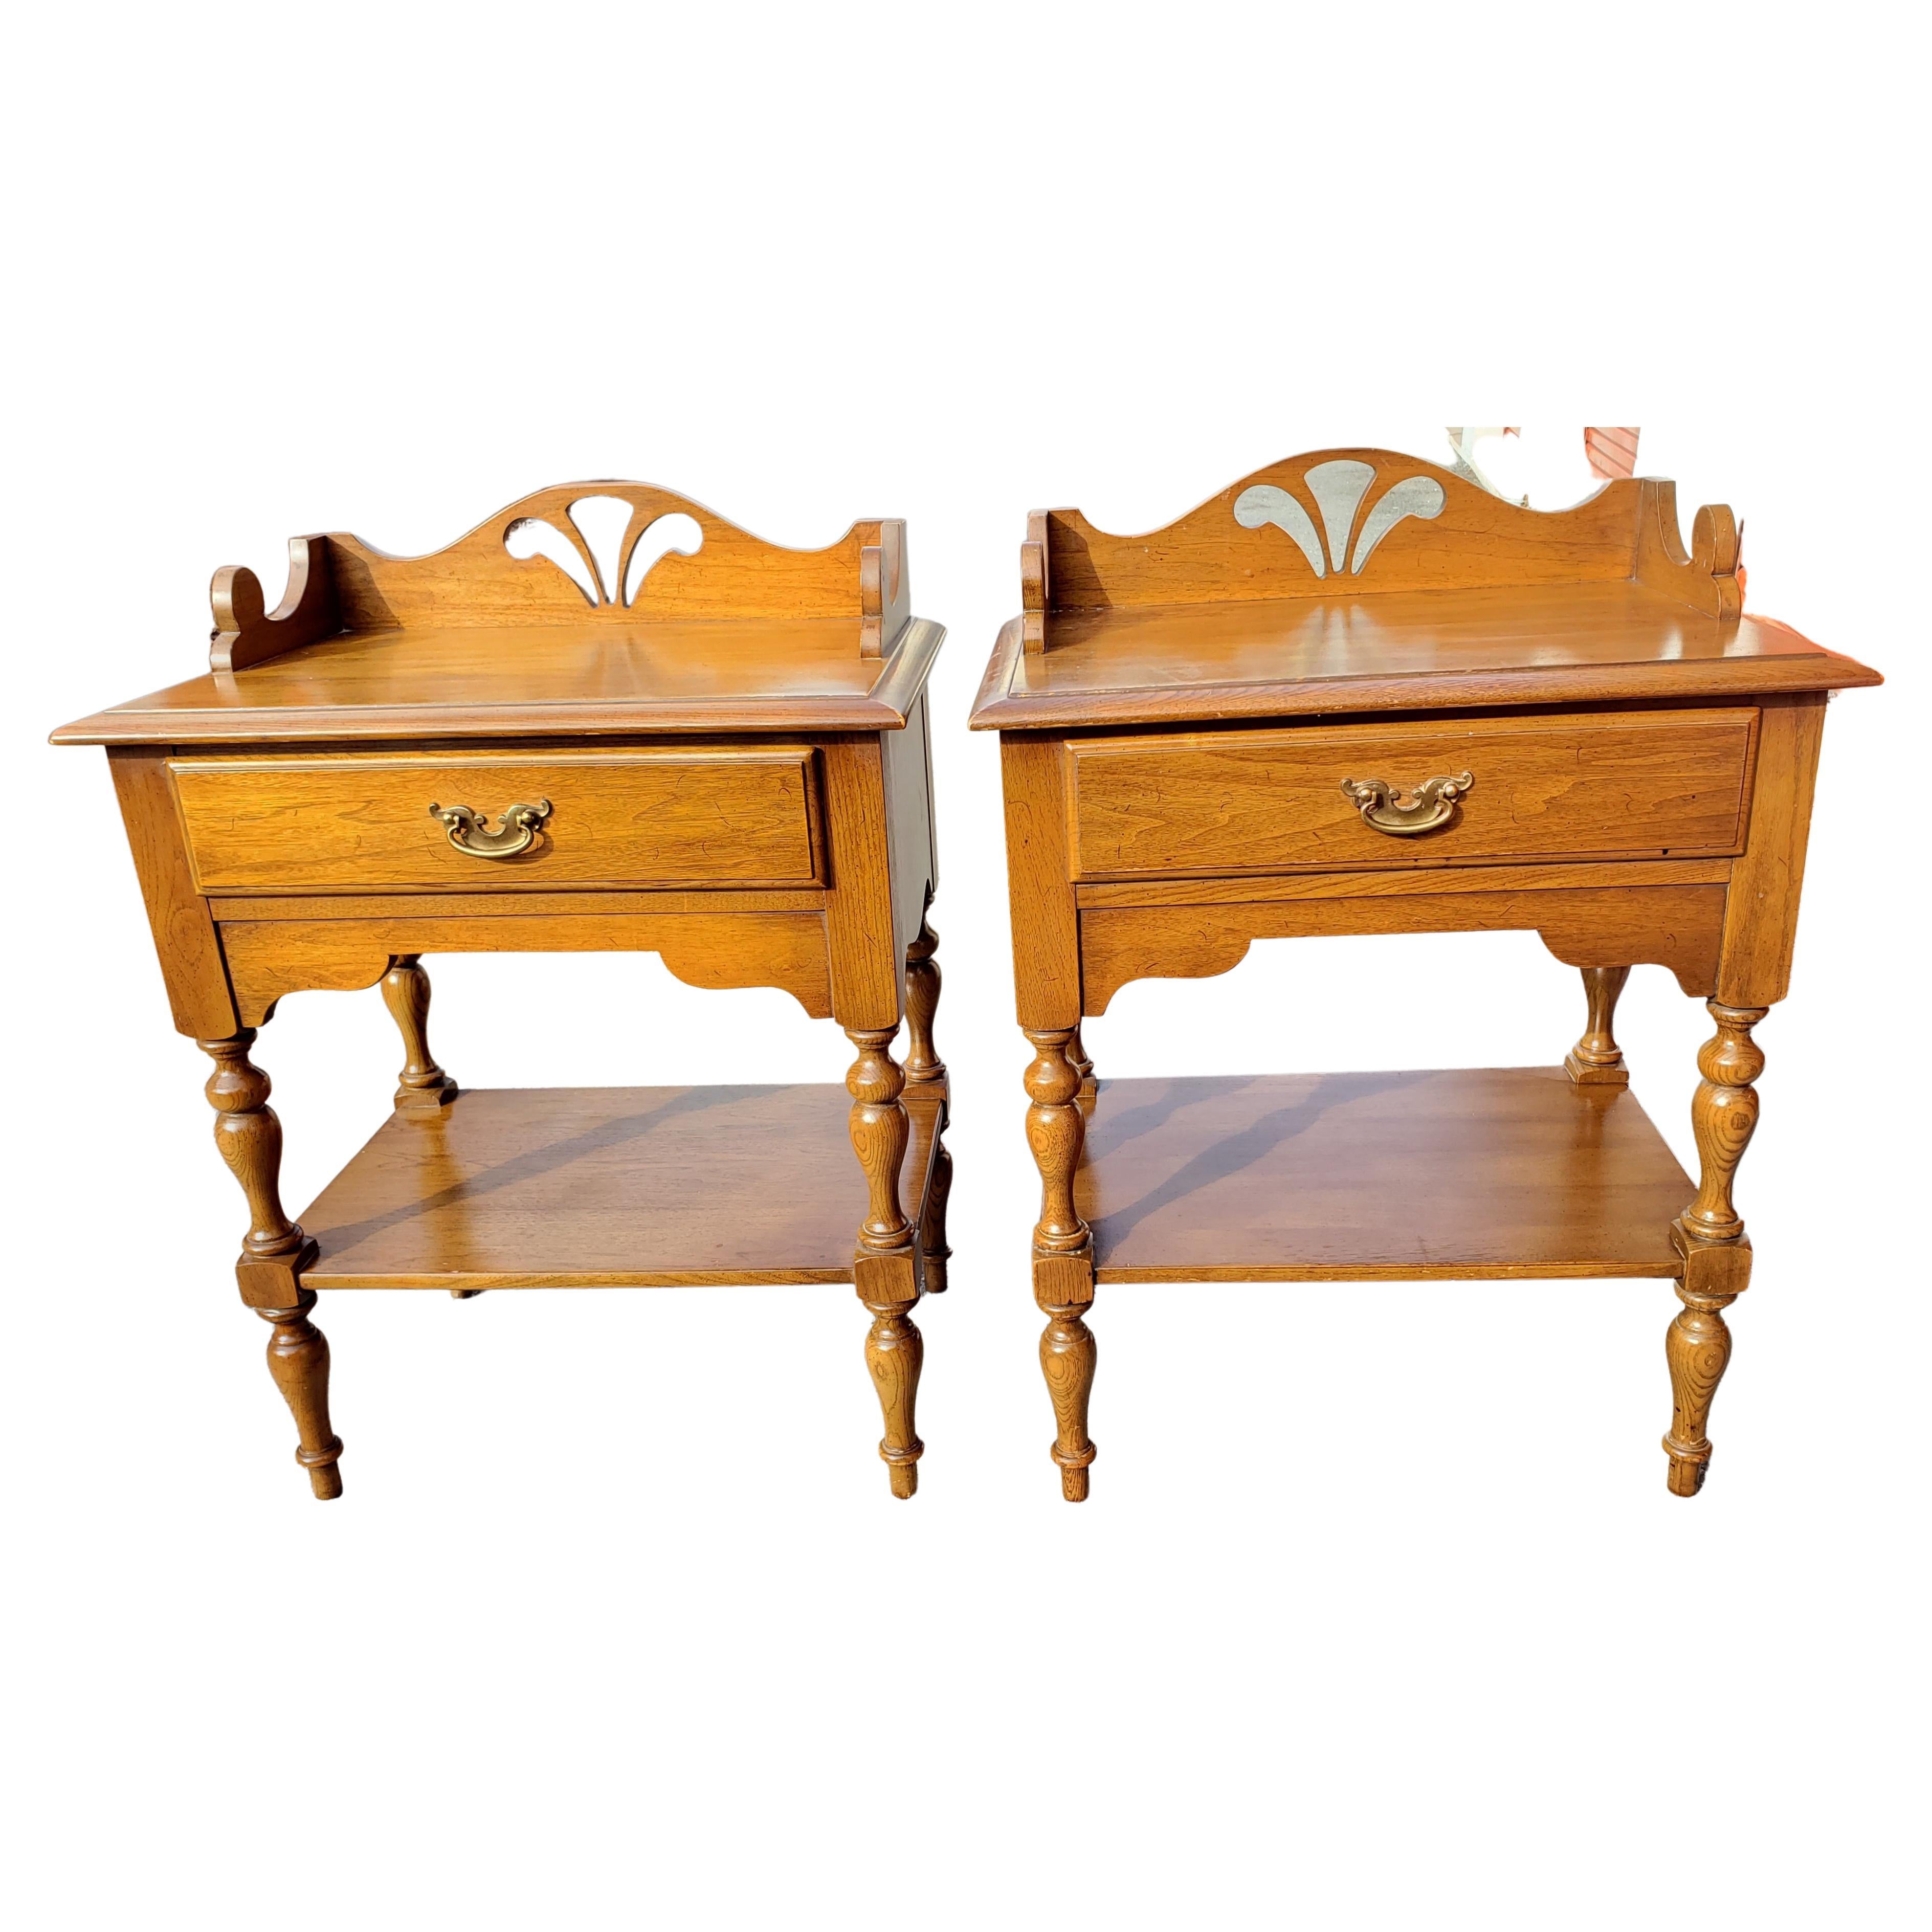 Beautiful pair of solid maple nightstands end tables, bedside tables from the Penn Colony Collection of Broyhill Premier in good condition. Very solid construction.
Good vintage condition with Wear appropriate with age and normal use. Measure 24